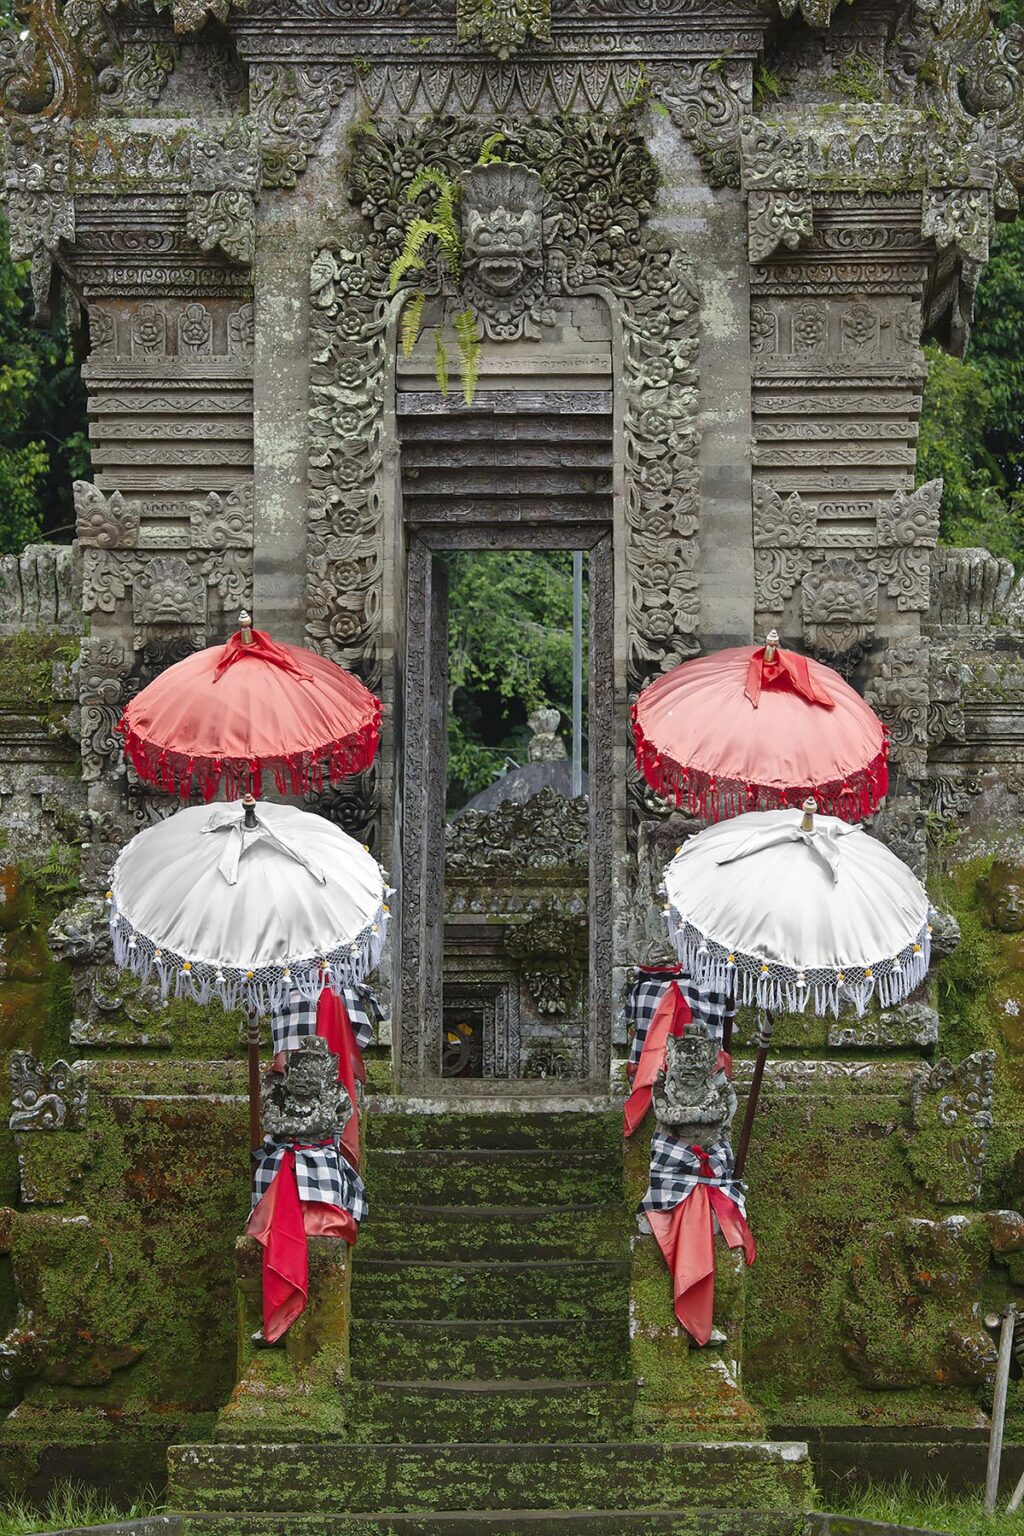 UMBRELLAS grace the entrance to the traditional village of PENGLIPURAN - BALI, INDONESIA